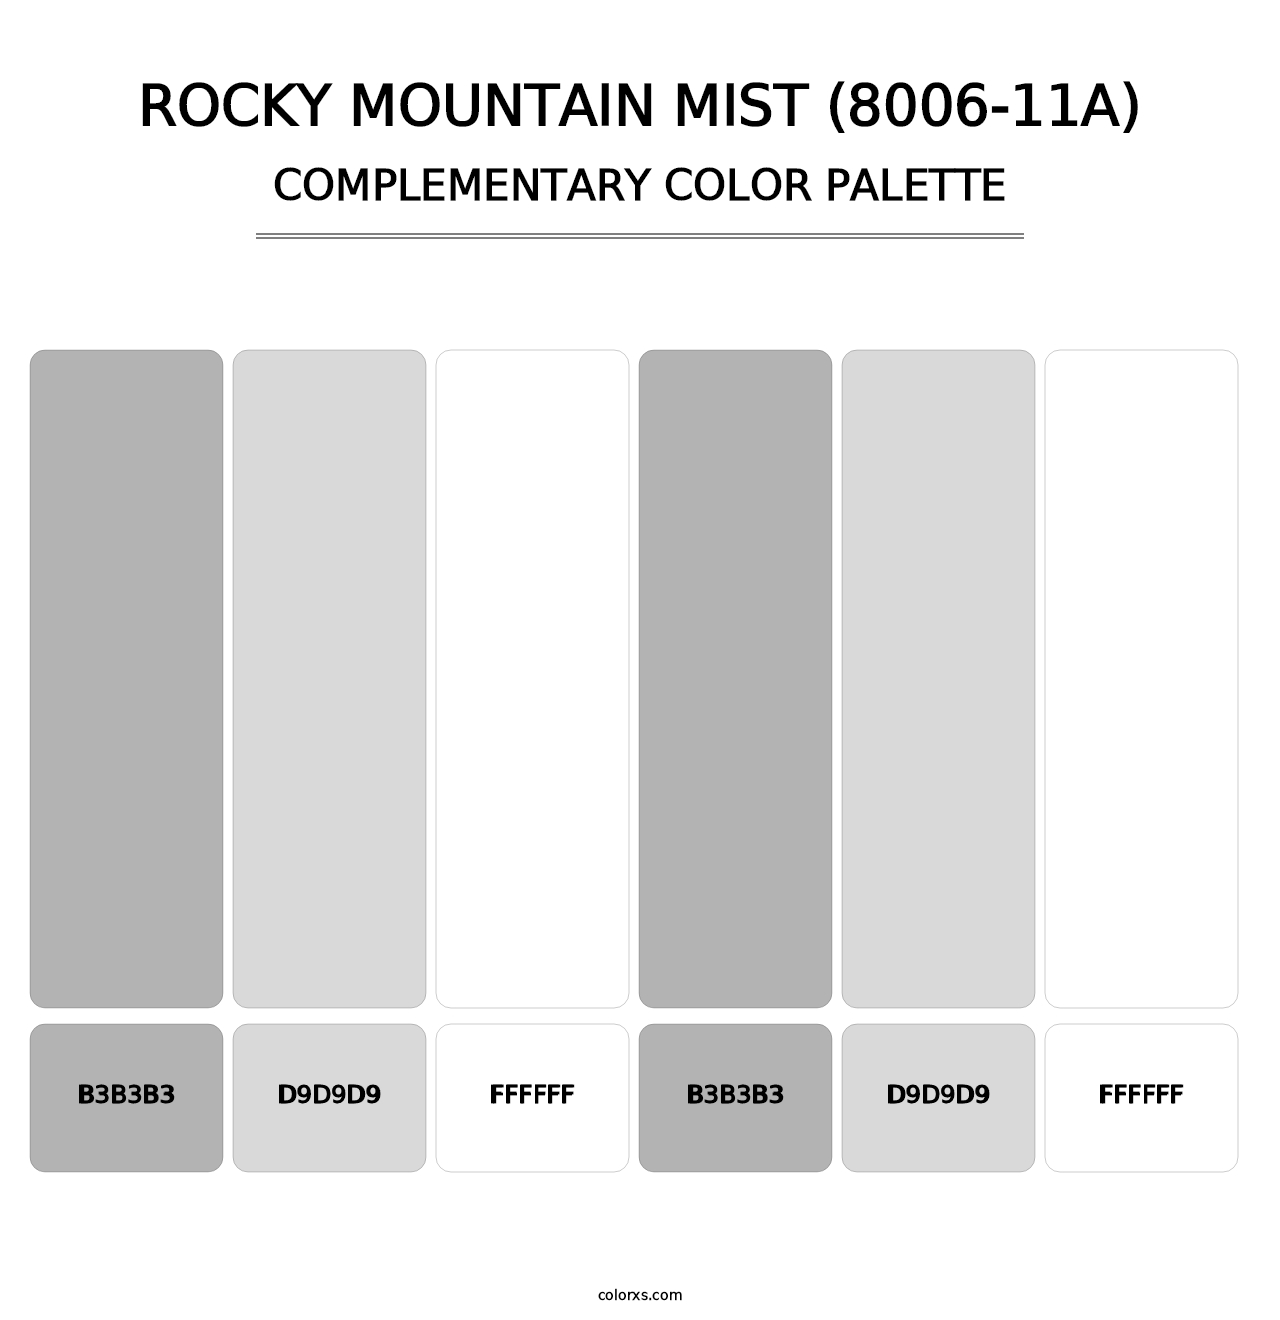 Rocky Mountain Mist (8006-11A) - Complementary Color Palette